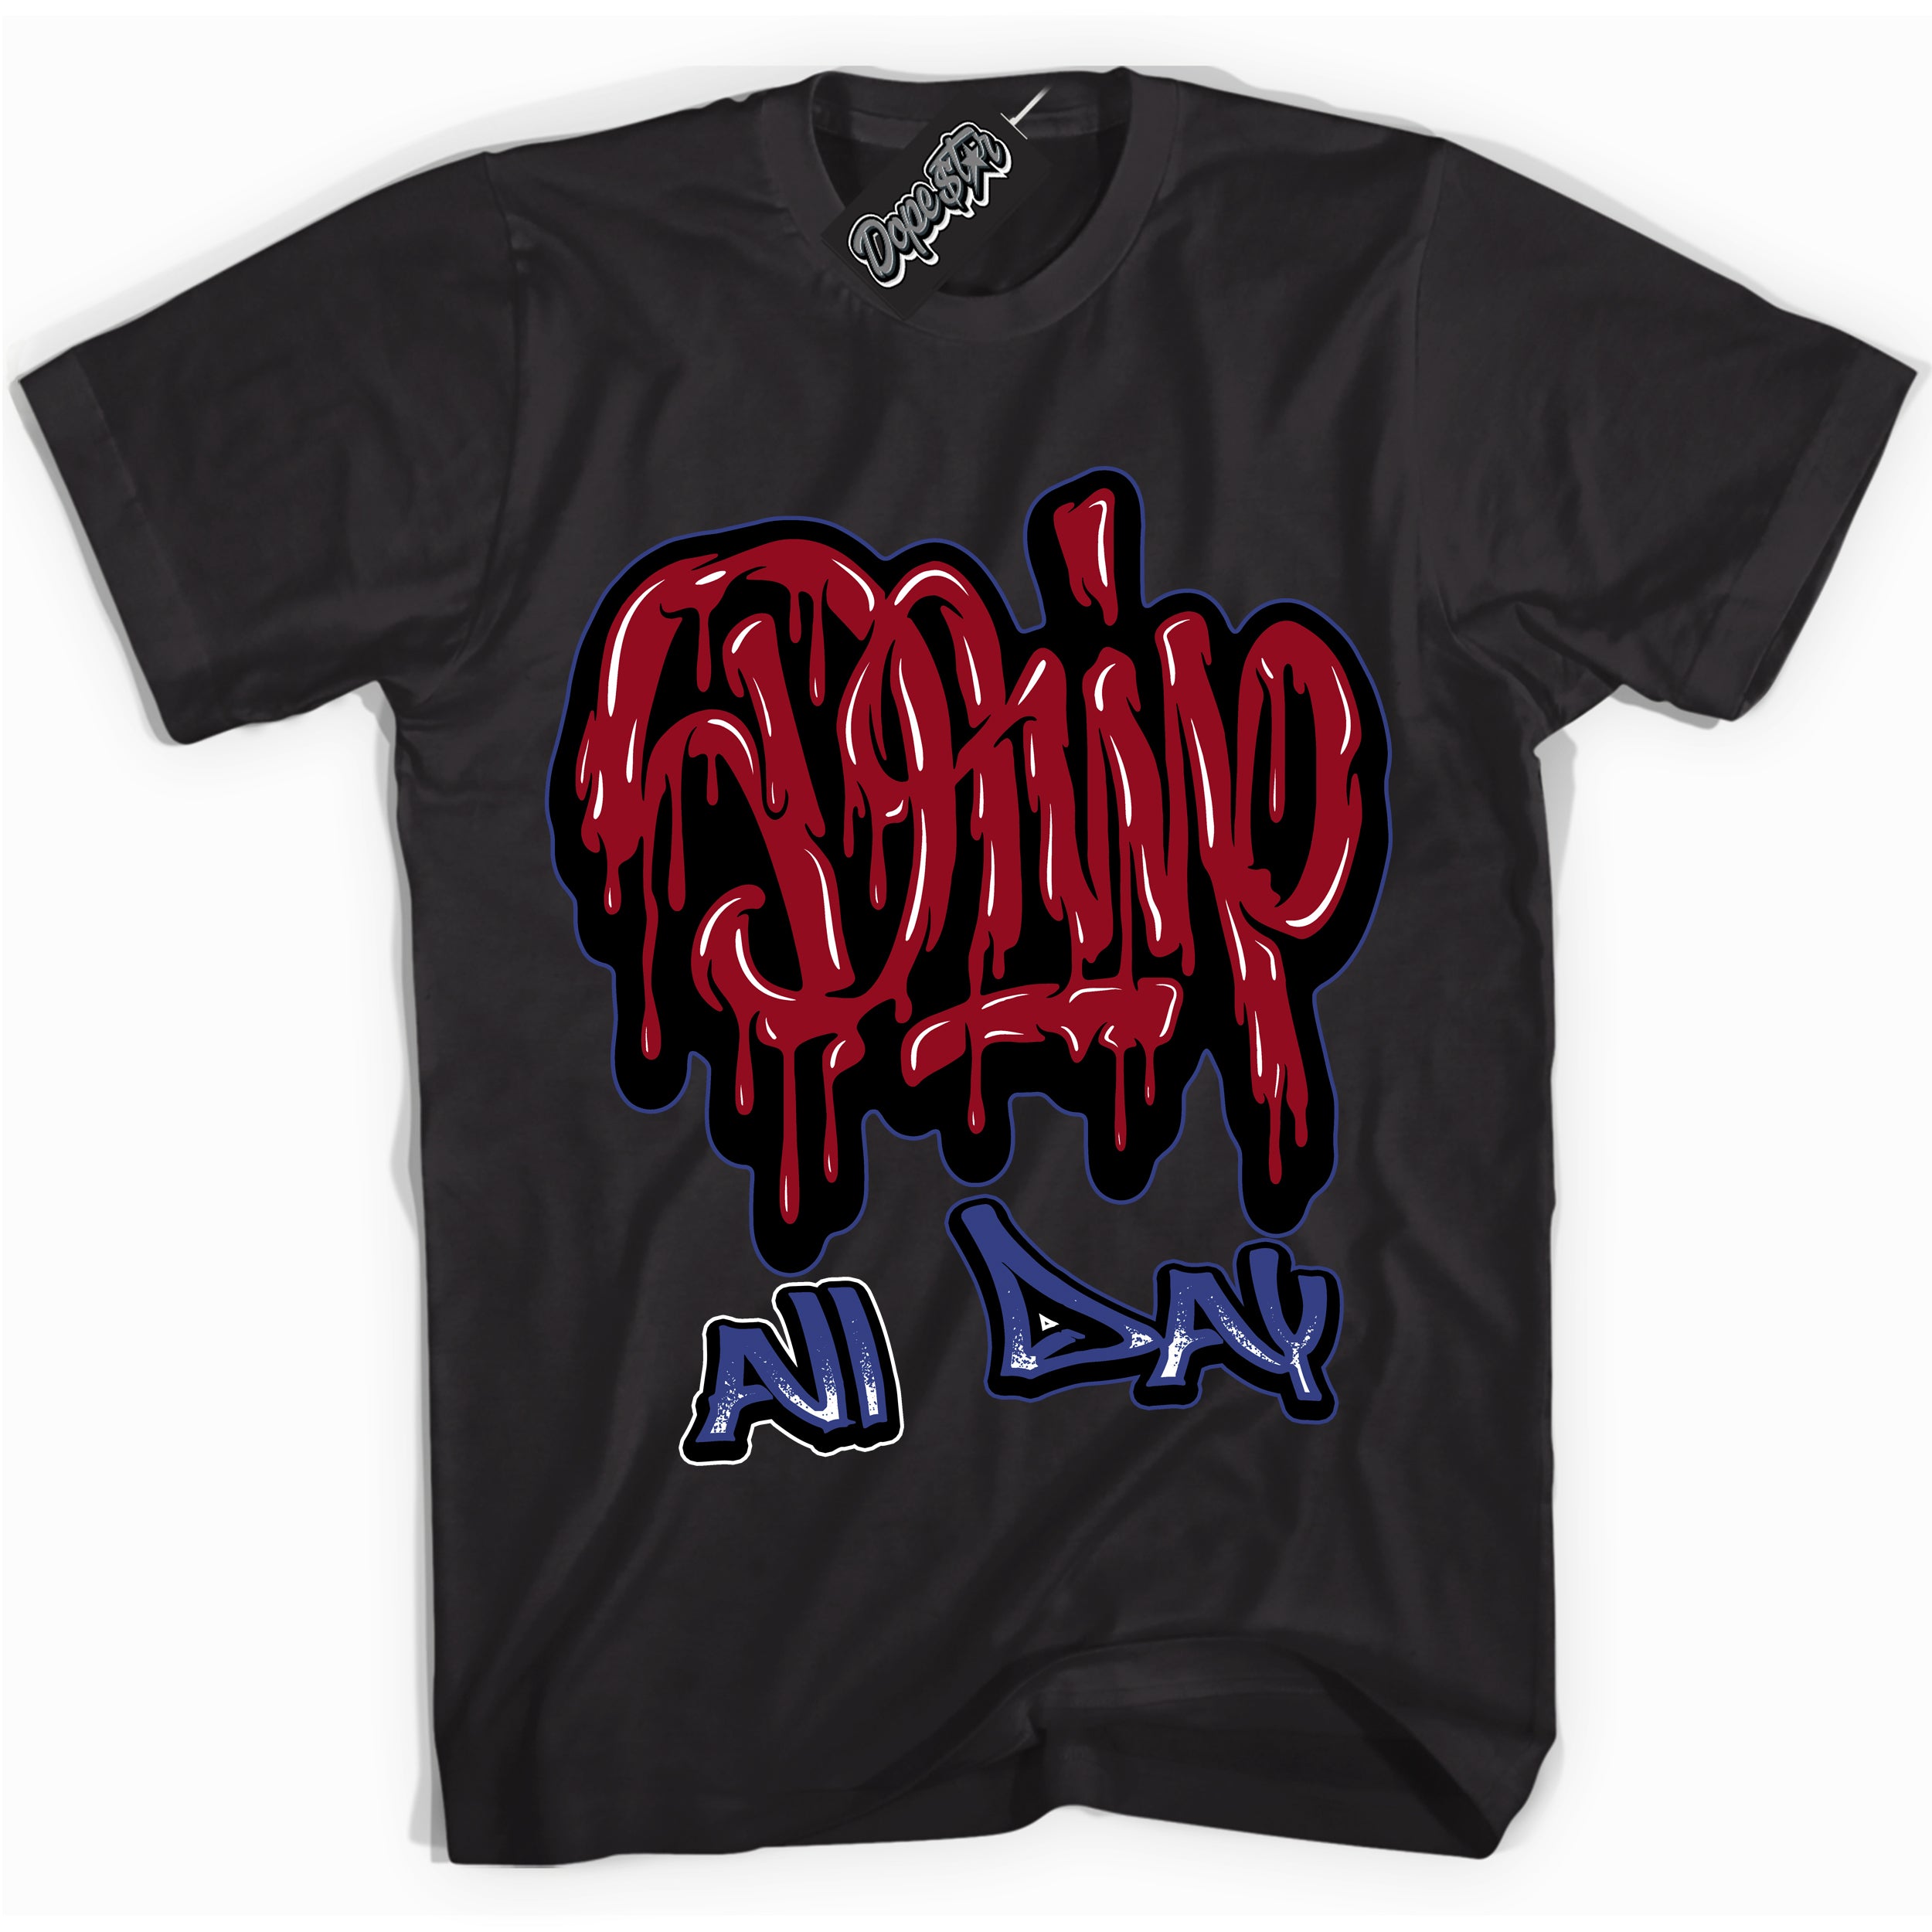 Cool Black Shirt with “ Drip All Day ” design that perfectly matches Playoffs 8s Sneakers.